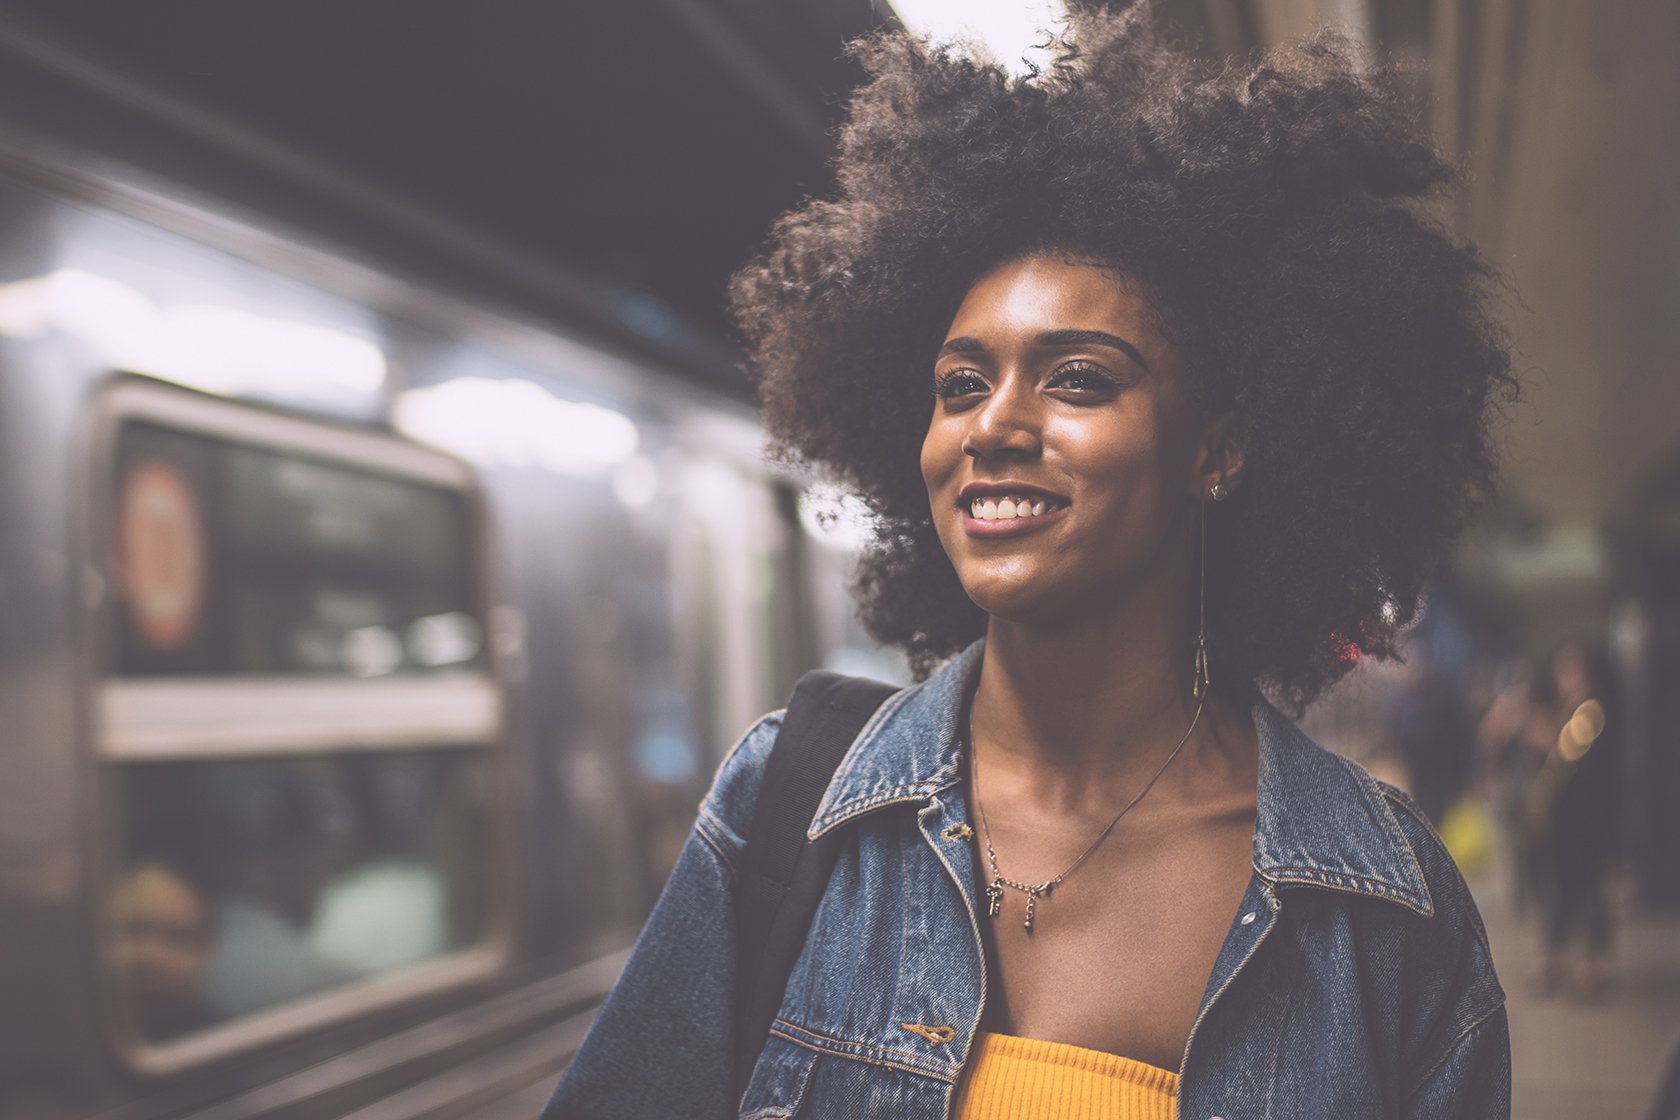 Black women smiling with an afro at the train station.